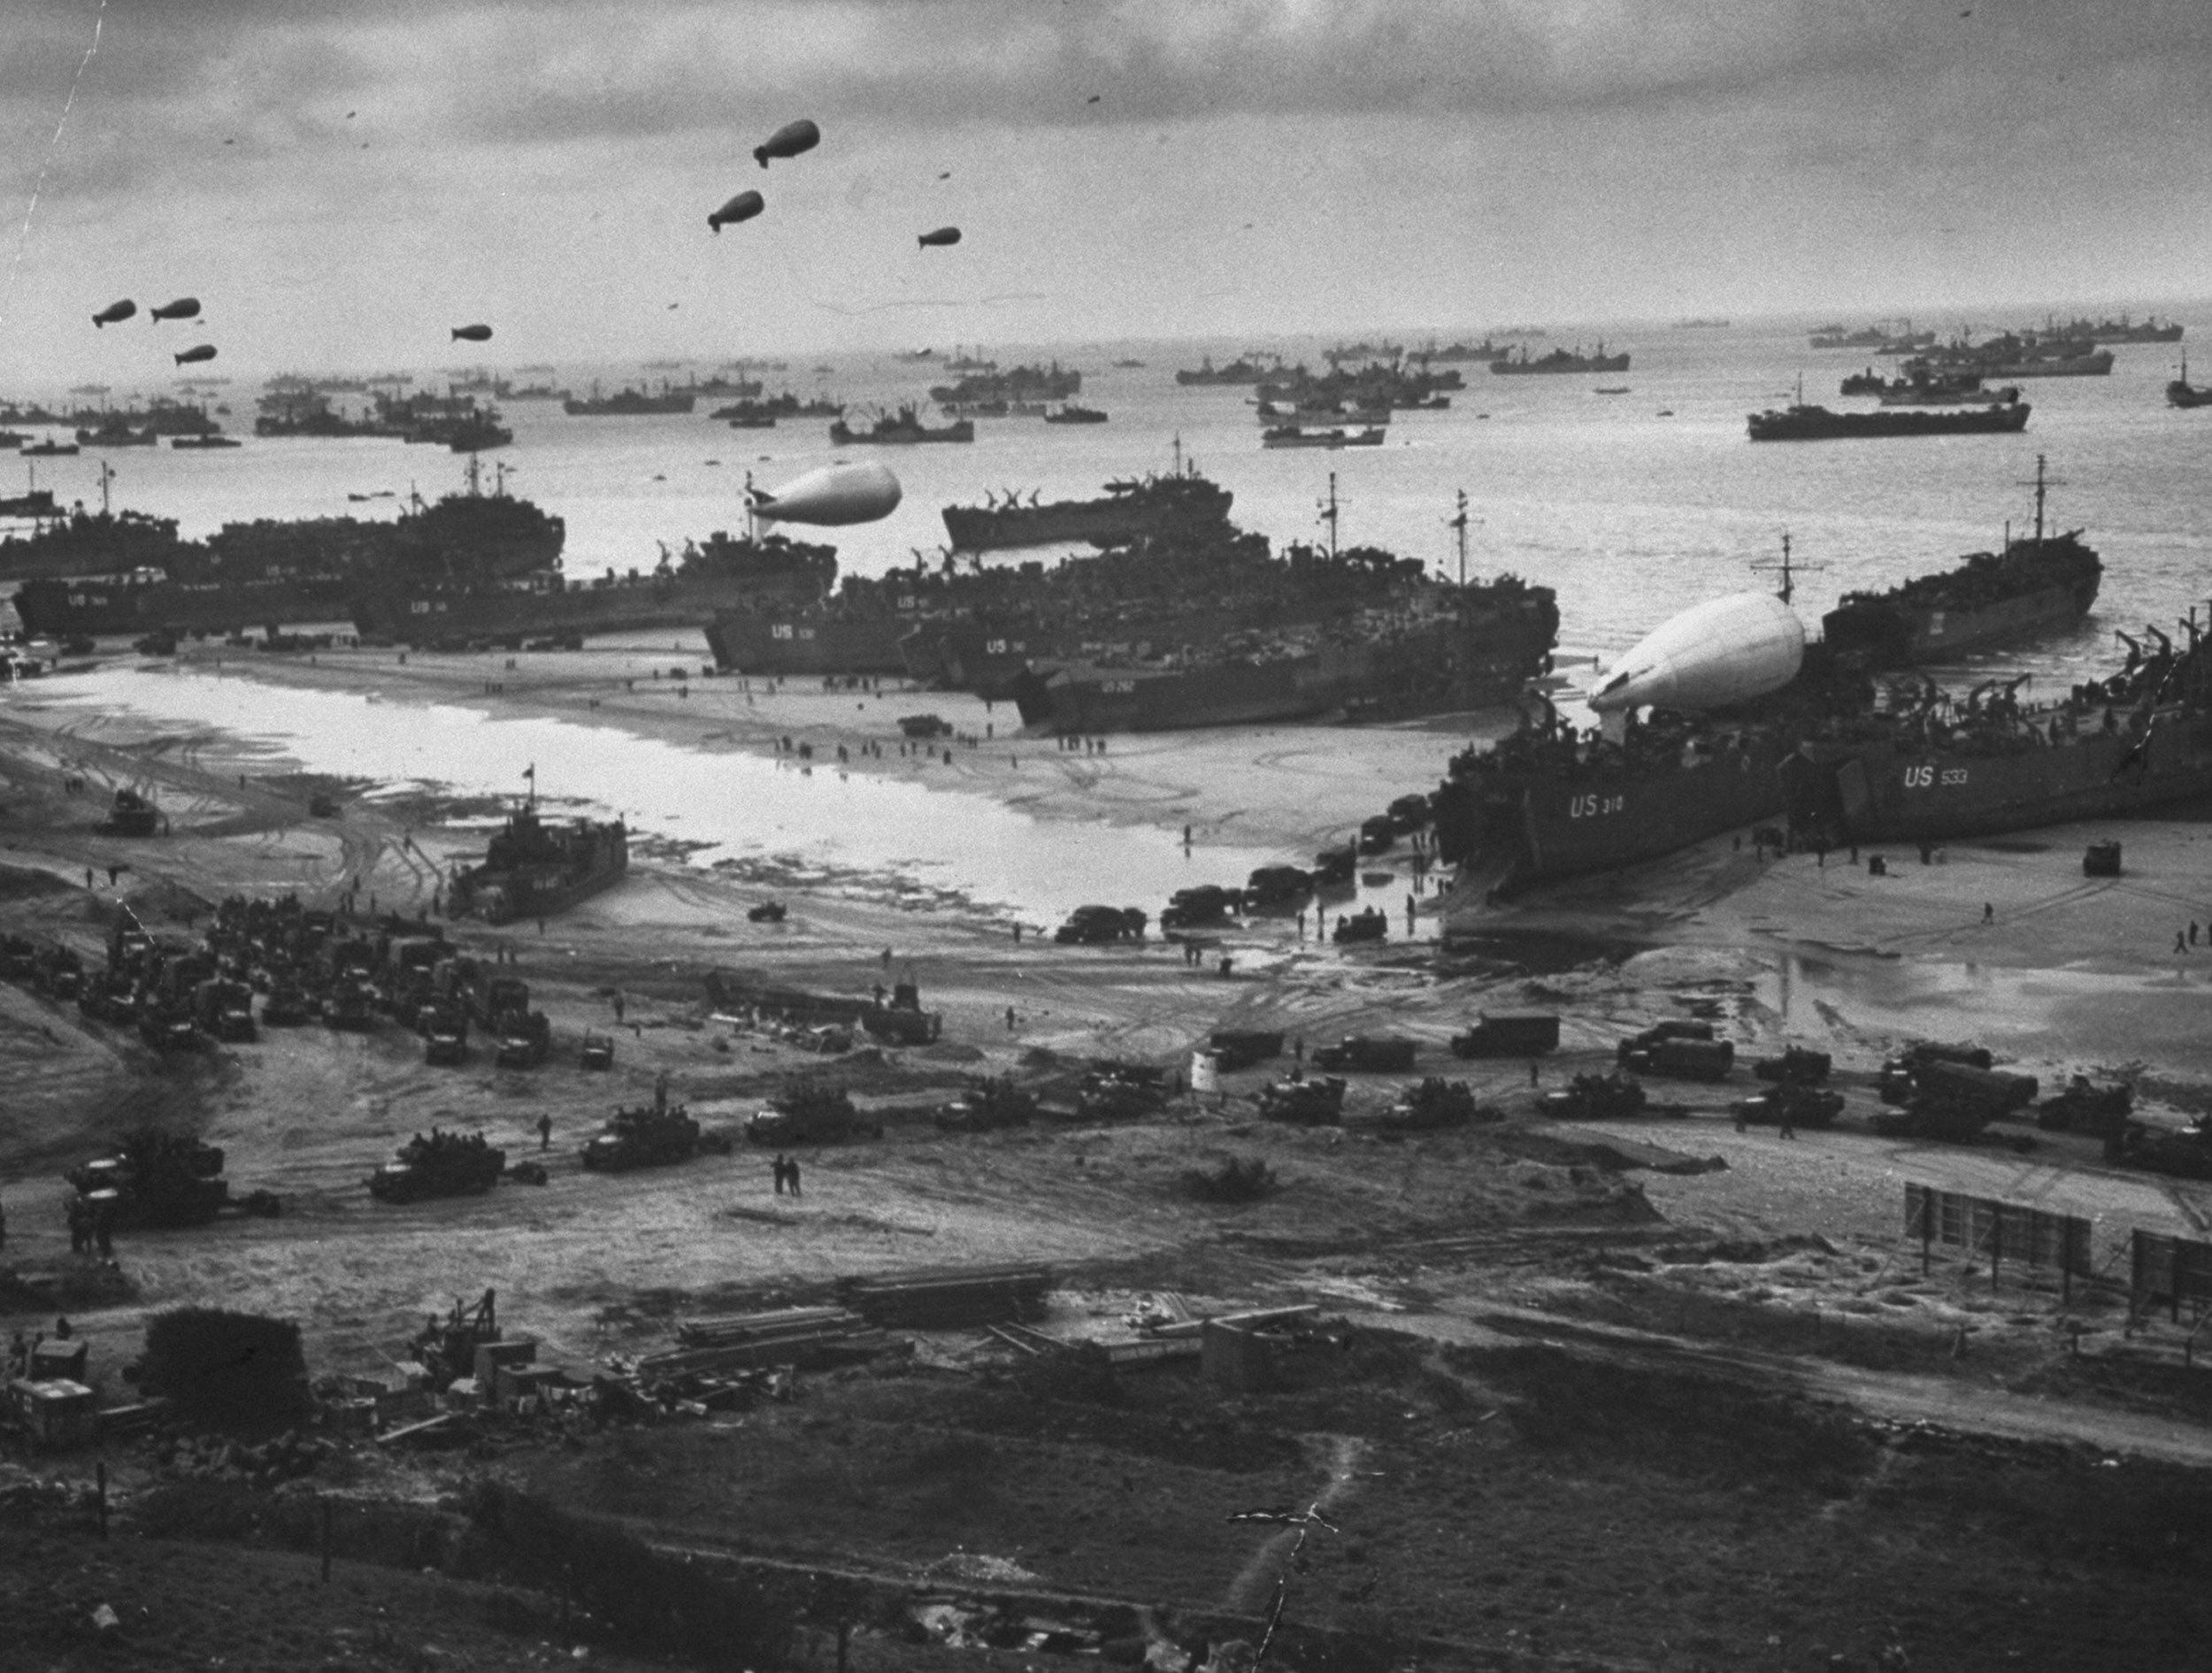 As The World Marks D Day 75 Years On, Post War Alliance Is In Doubt